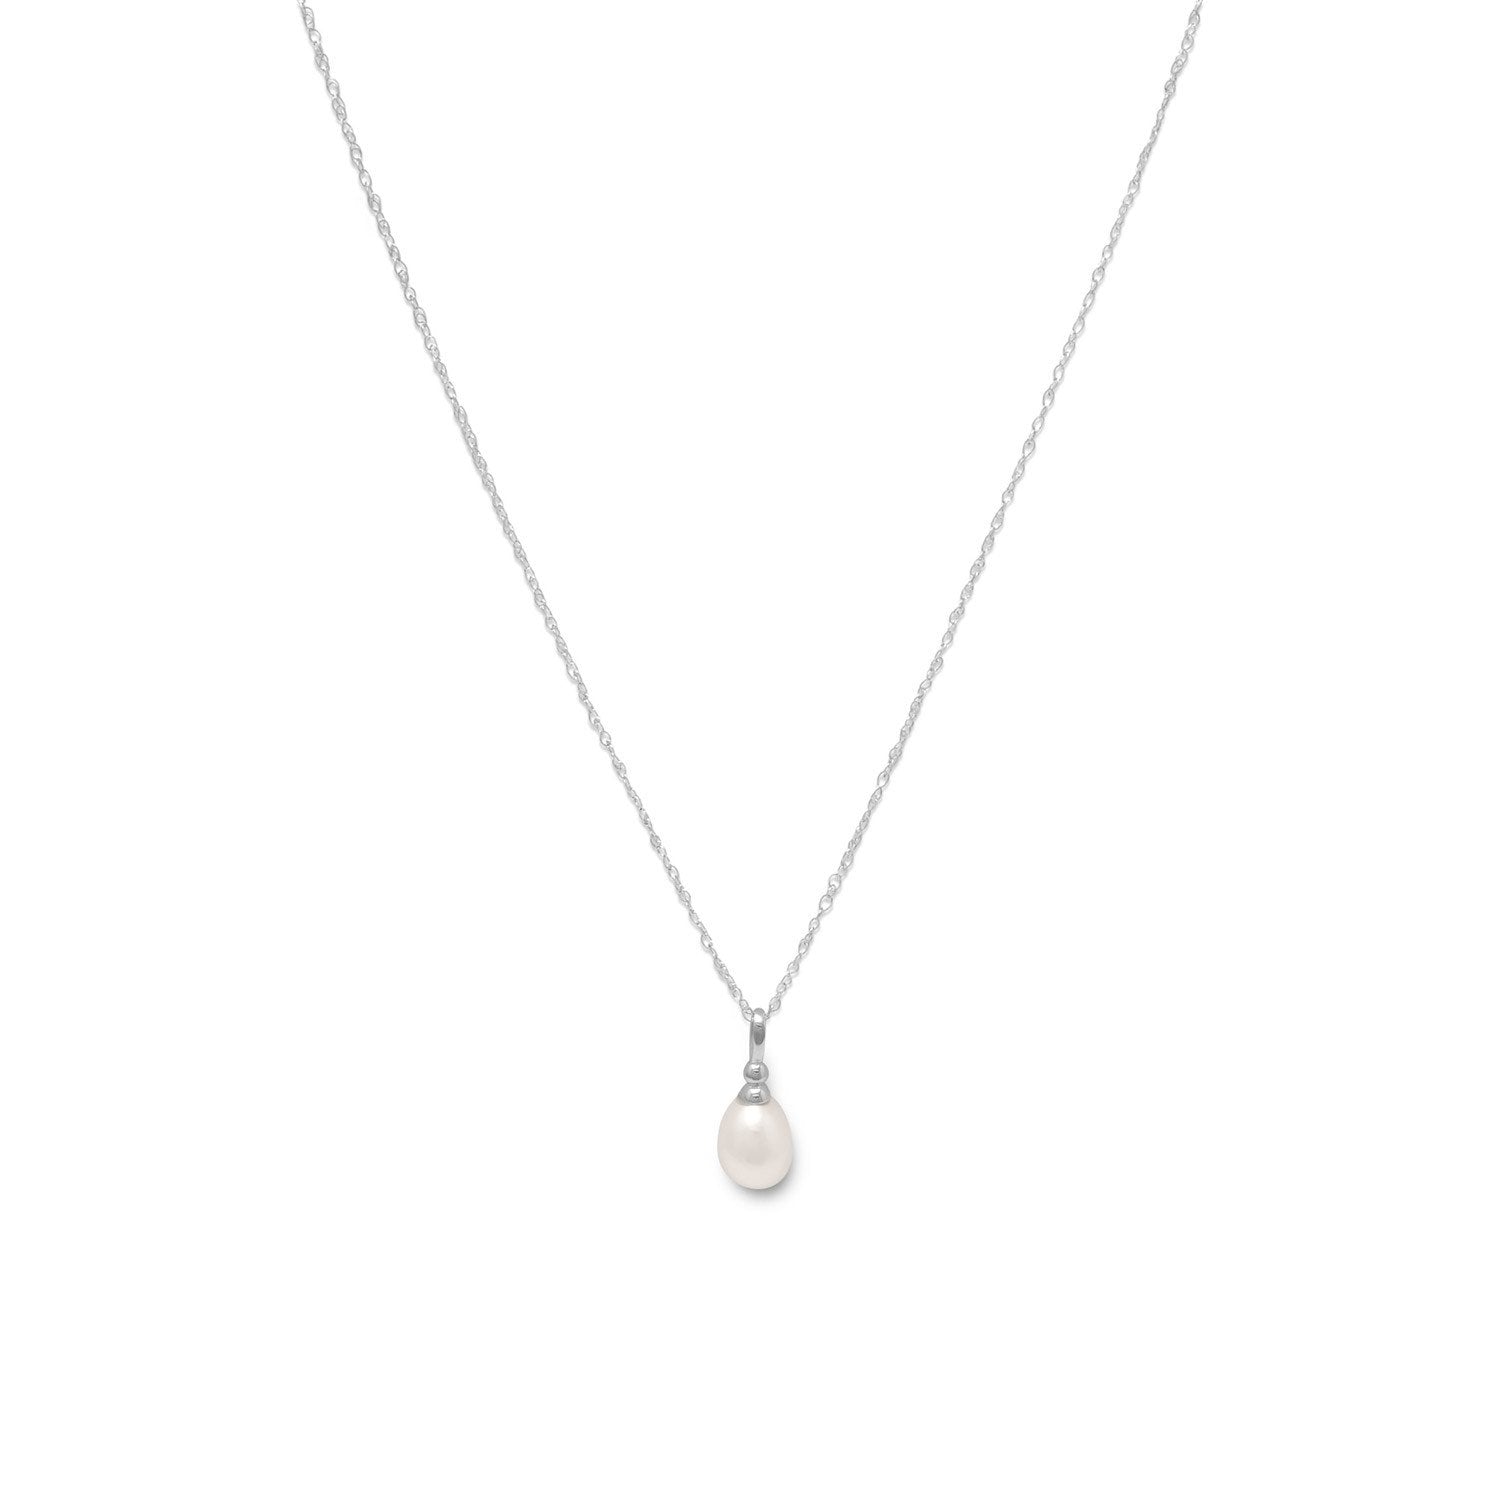 18" Rhodium Plated Cultured Freshwater Pearl Drop Necklace - Joyeria Lady